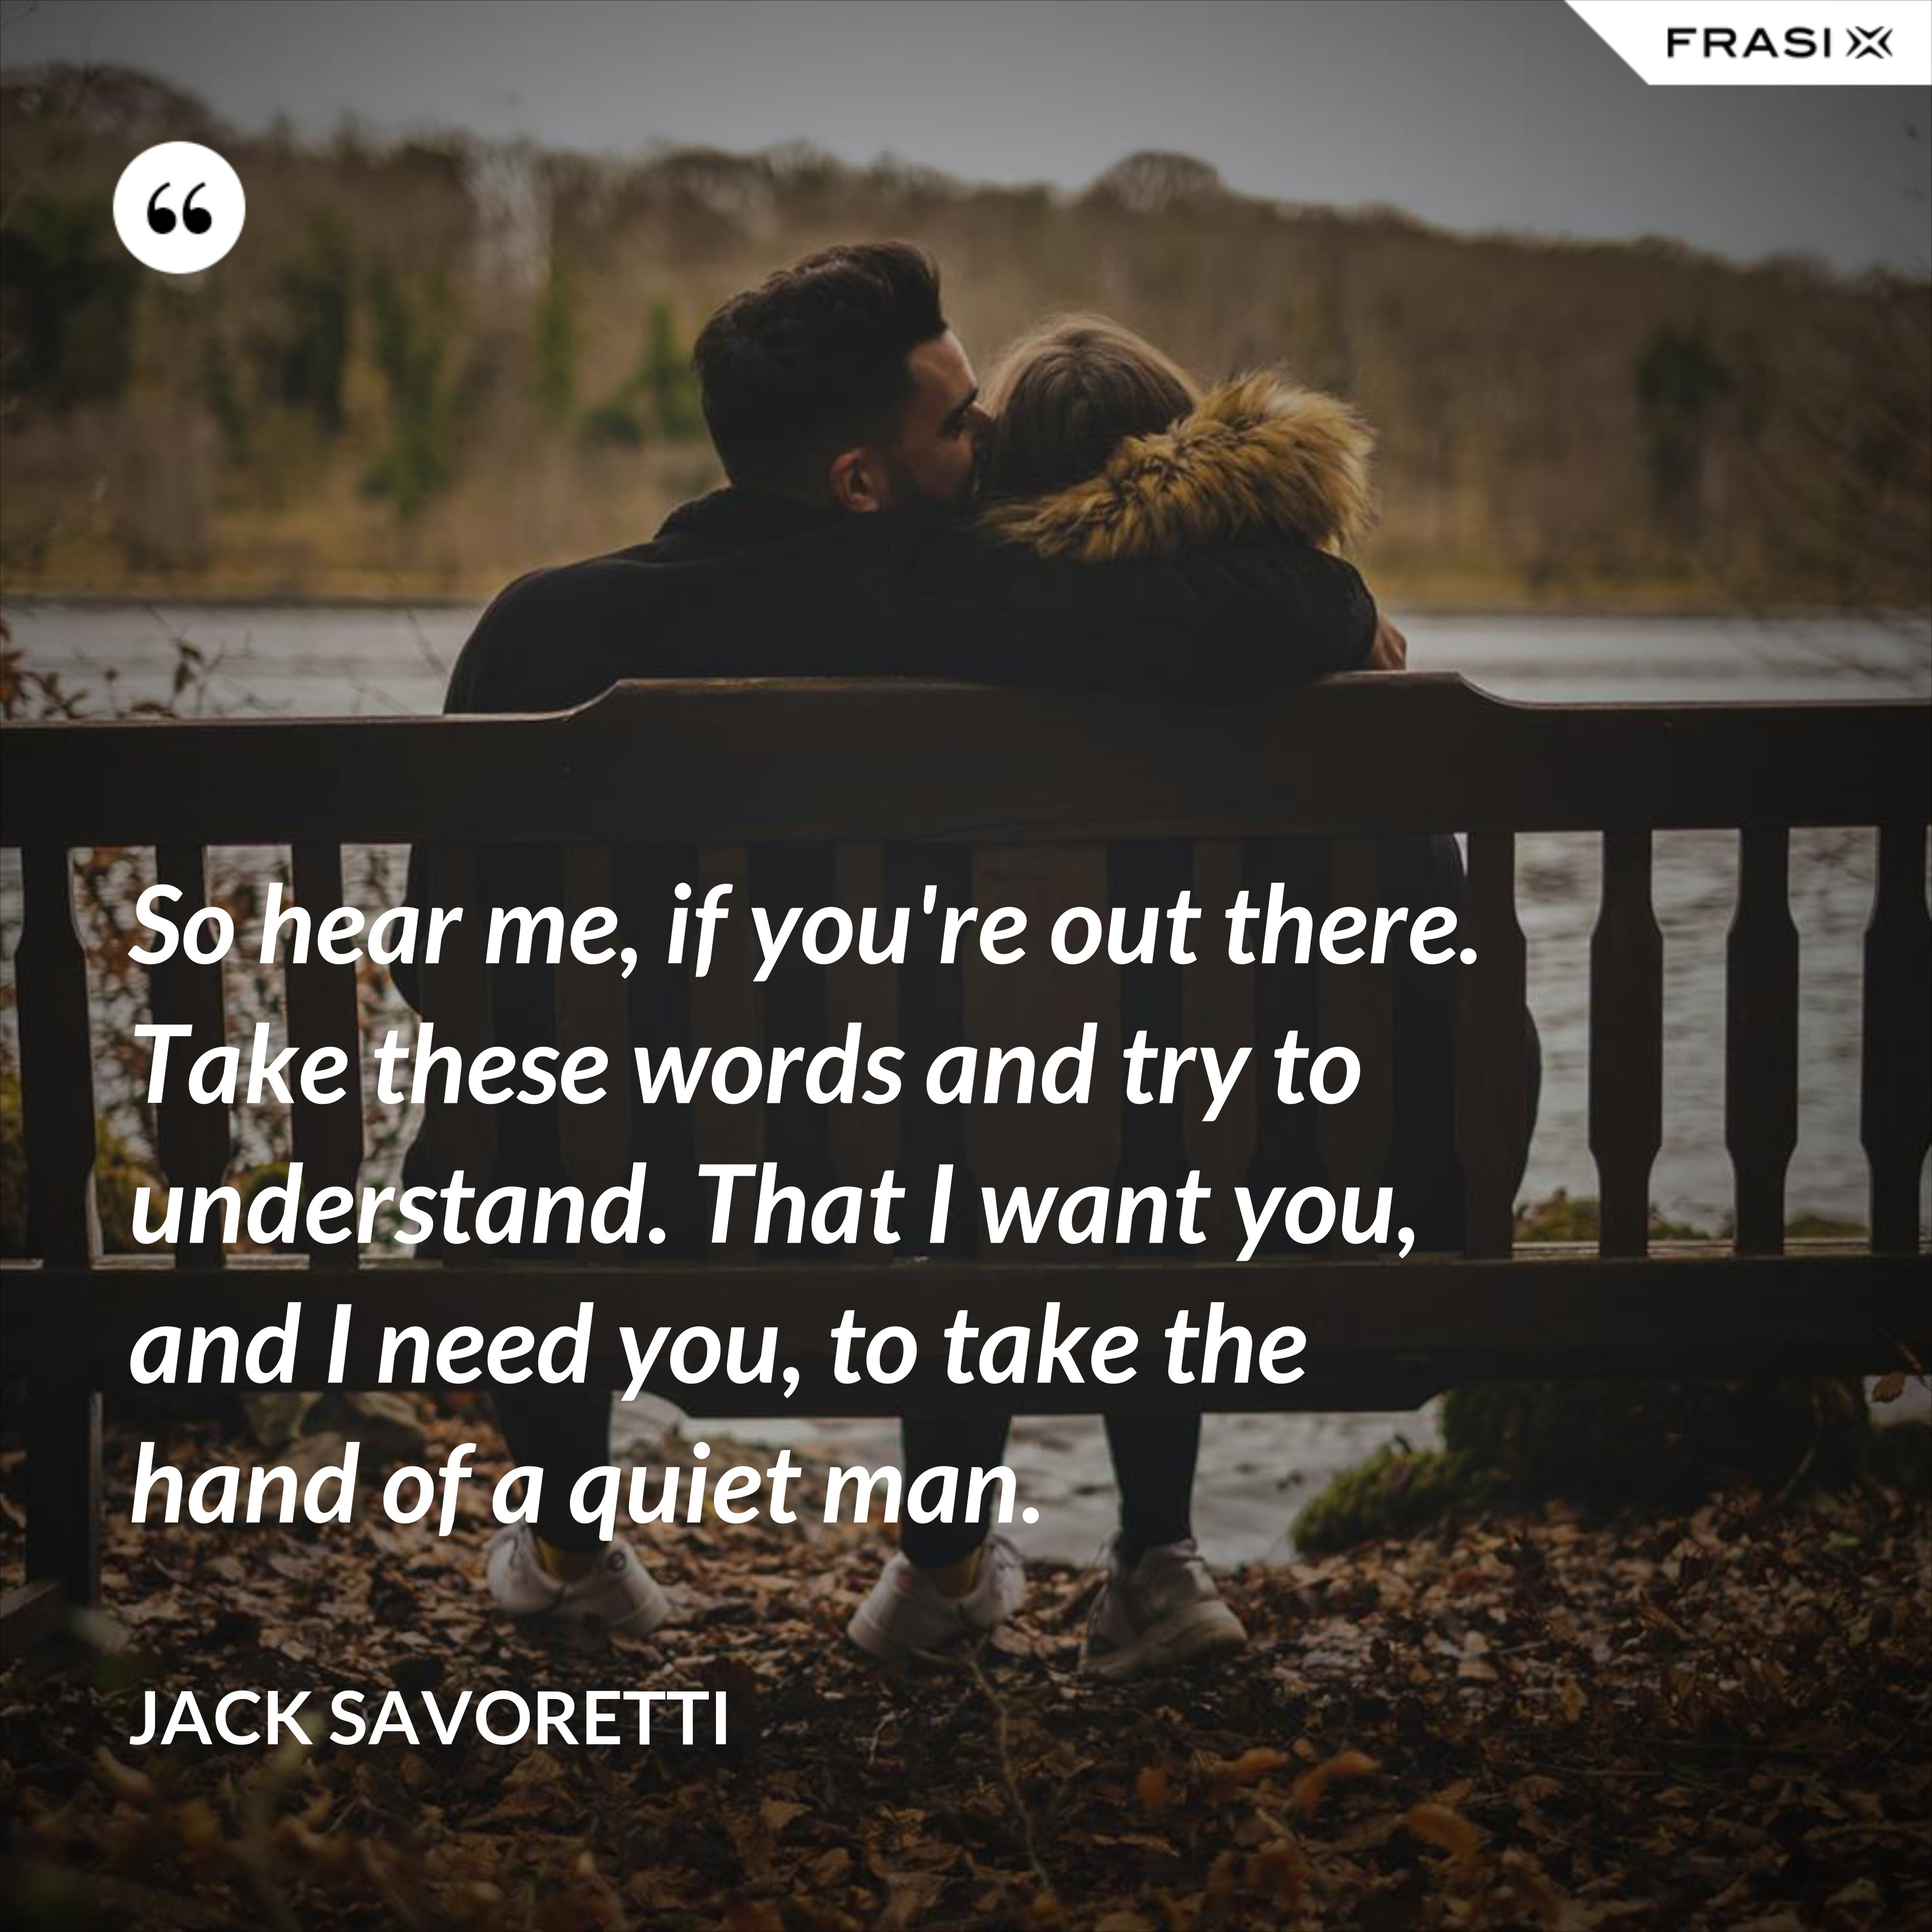 So hear me, if you're out there. Take these words and try to understand. That I want you, and I need you, to take the hand of a quiet man. - Jack Savoretti